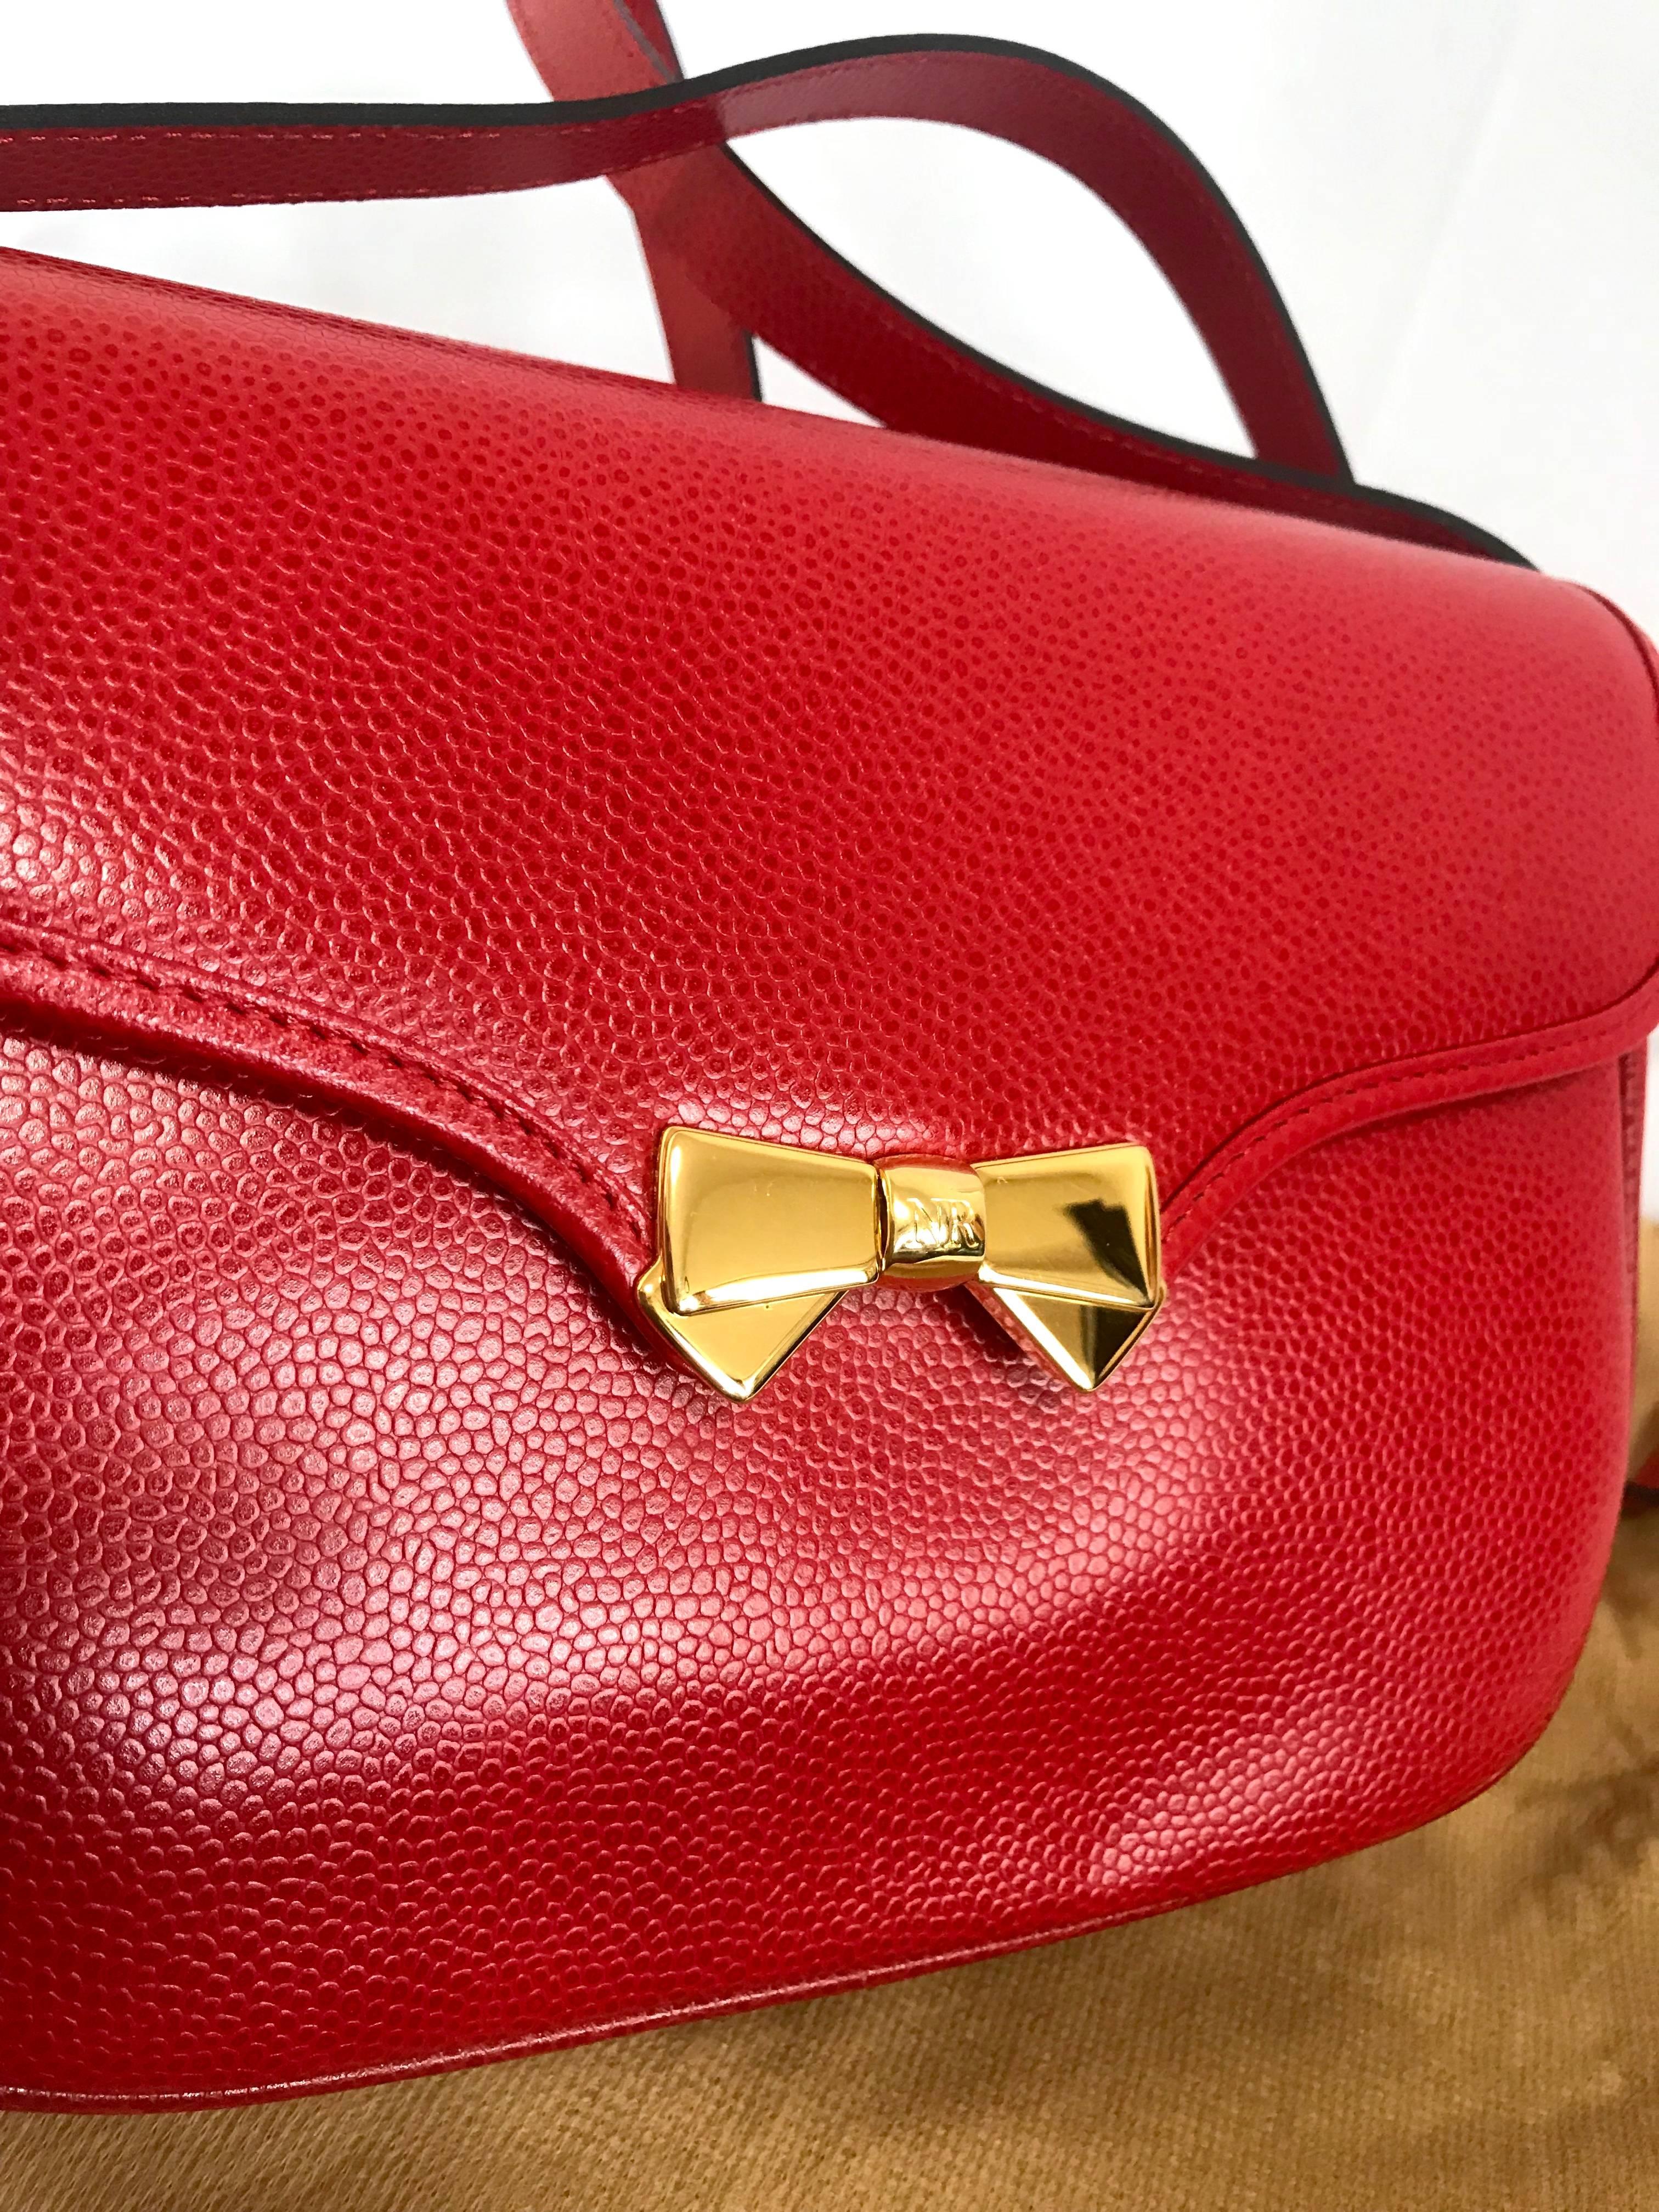 MINT. Vintage Nina Ricci red grained leather shoulder bag with golden logo bow In New Condition For Sale In Kashiwa, Chiba